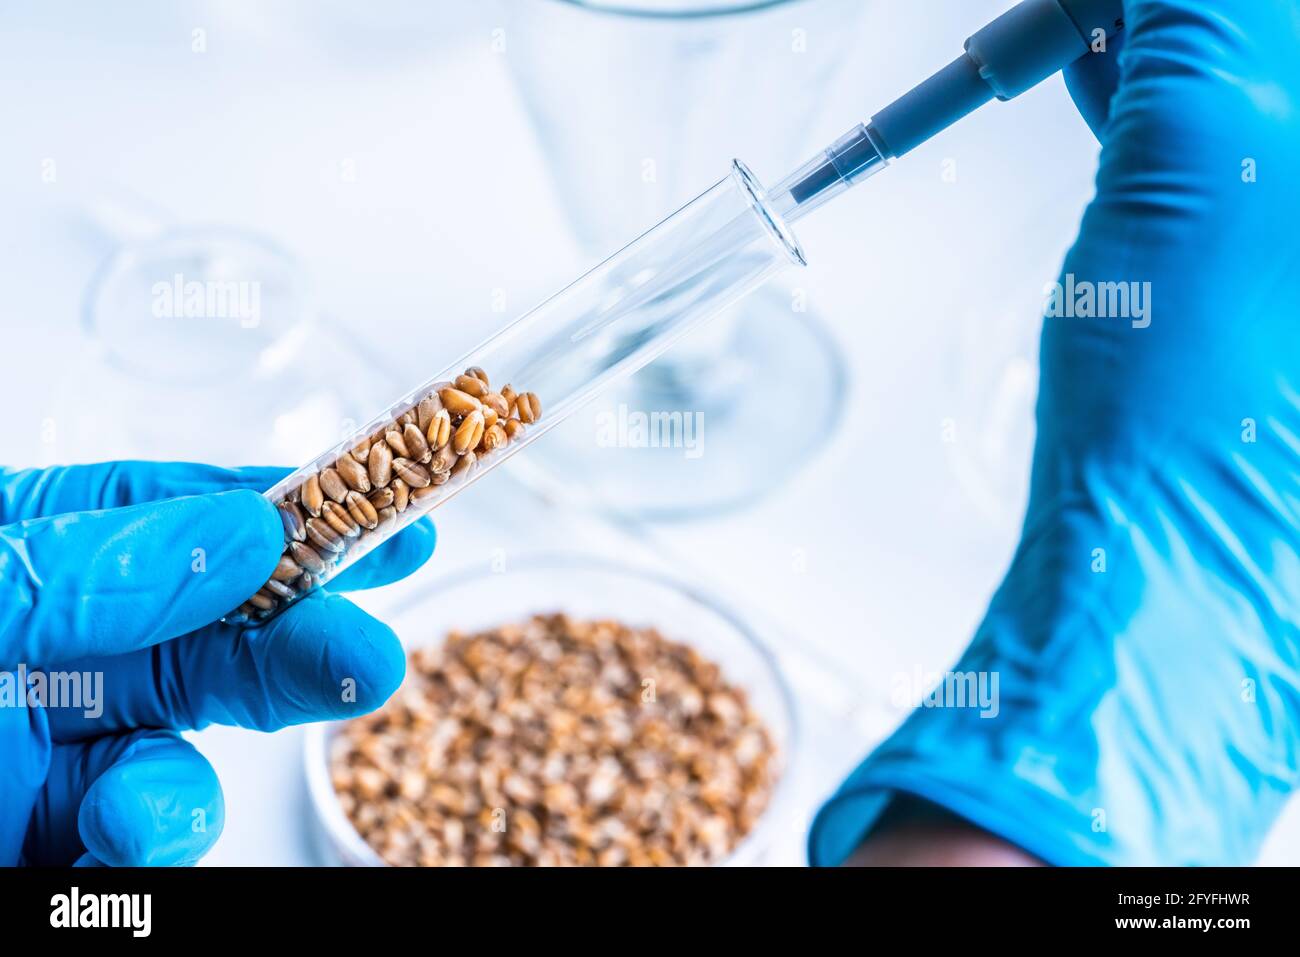 Agri-food research laboratory. Wheat grains in a test tube. Stock Photo